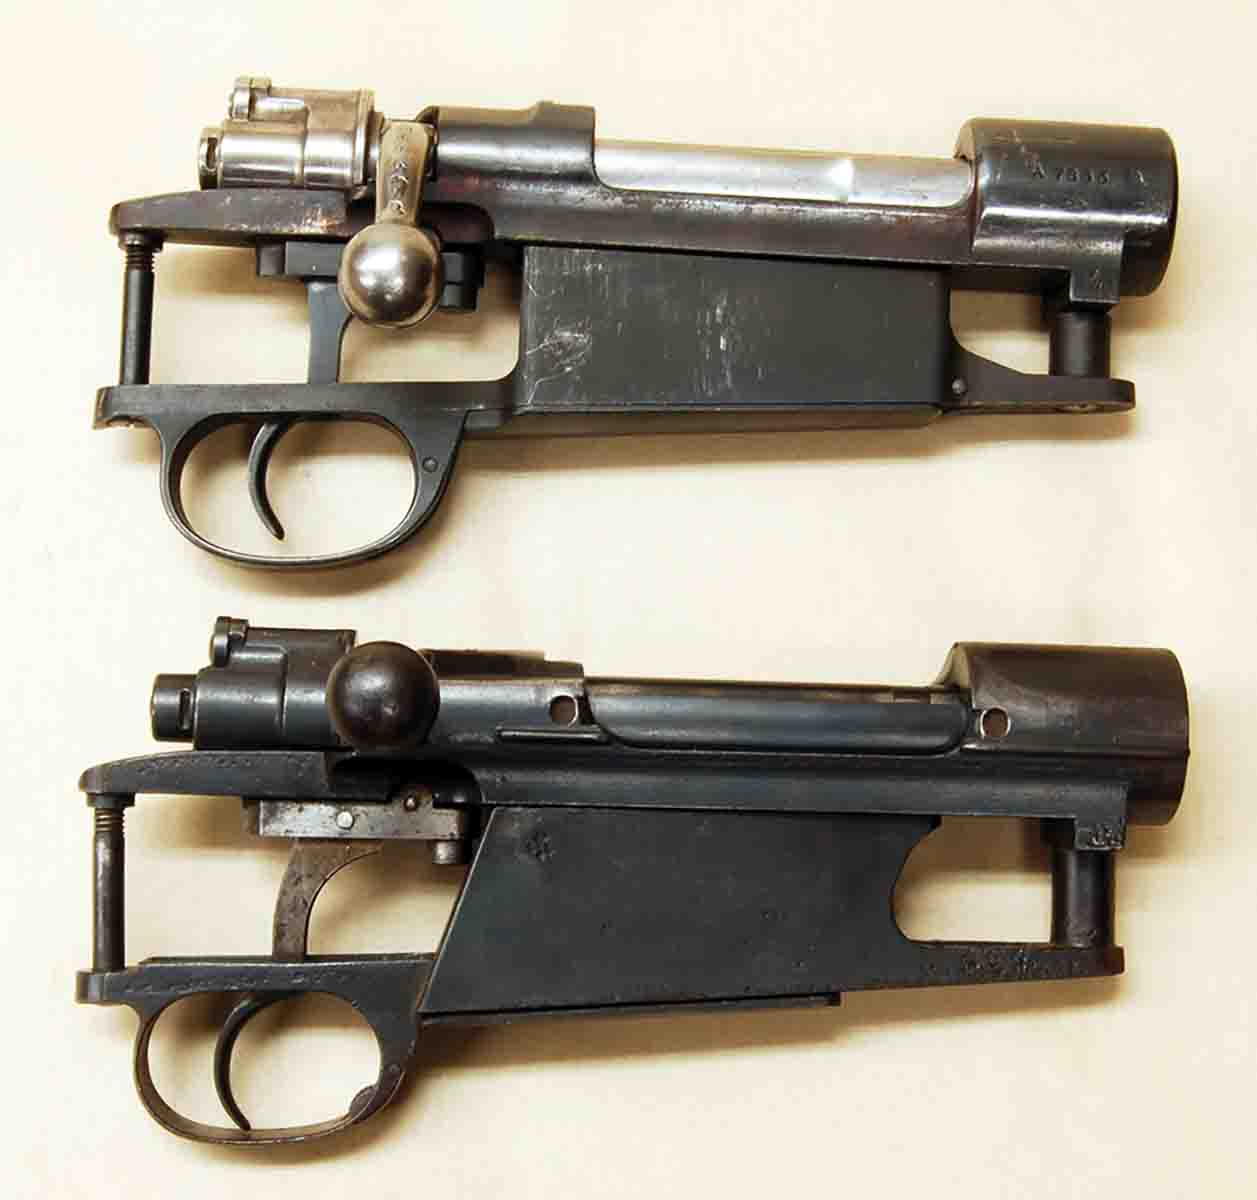 The 1909 Argentine Mauser 98 action (top) has a conventional magazine box, while the Siamese Mauser (bottom) uses an odd-looking “slant-box” magazine necessary for its rimmed cartridges.